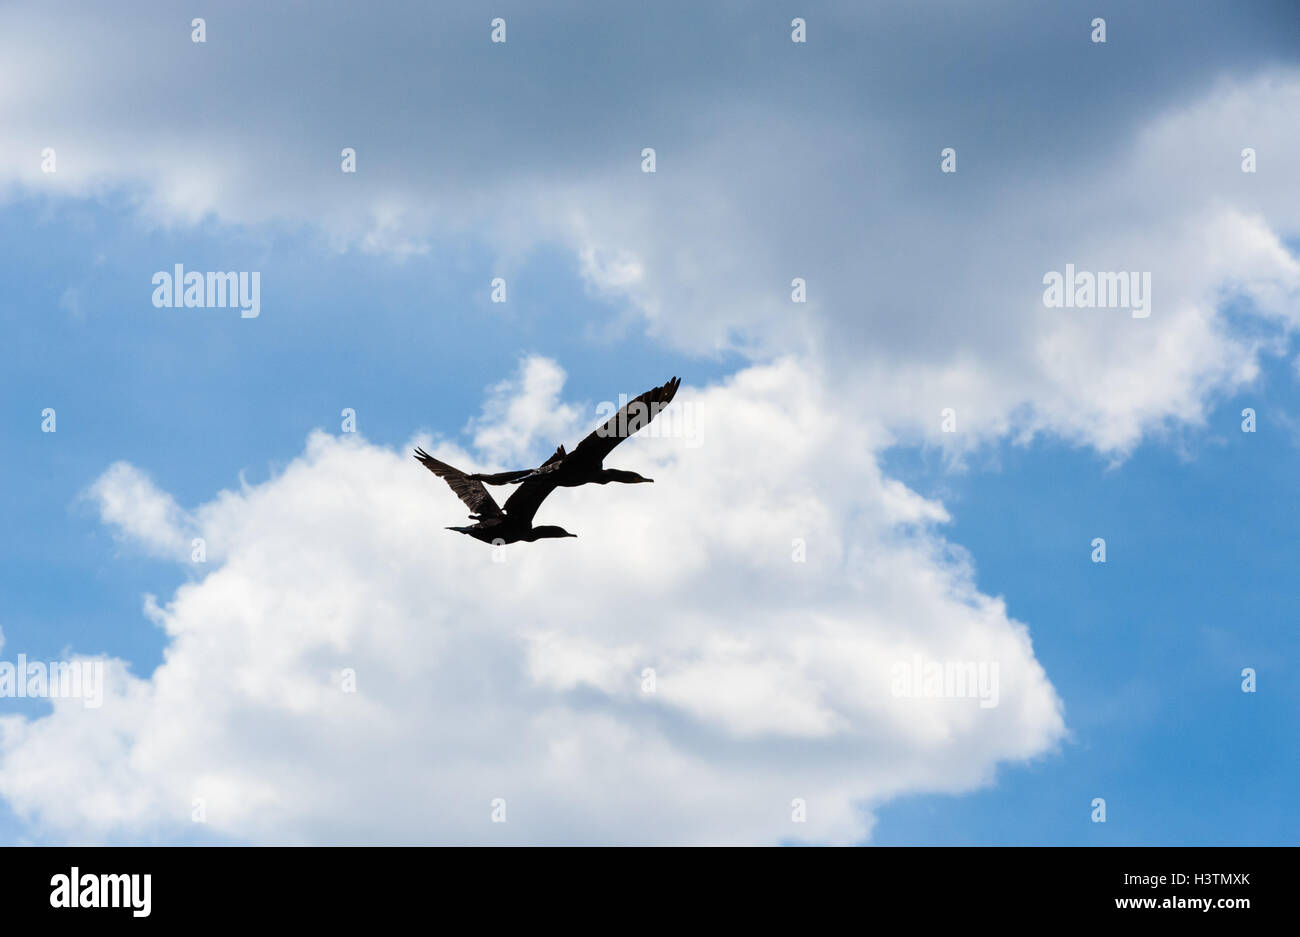 Two cormorant birds with wings open, flying across cumulus clouds on sky. Stock Photo